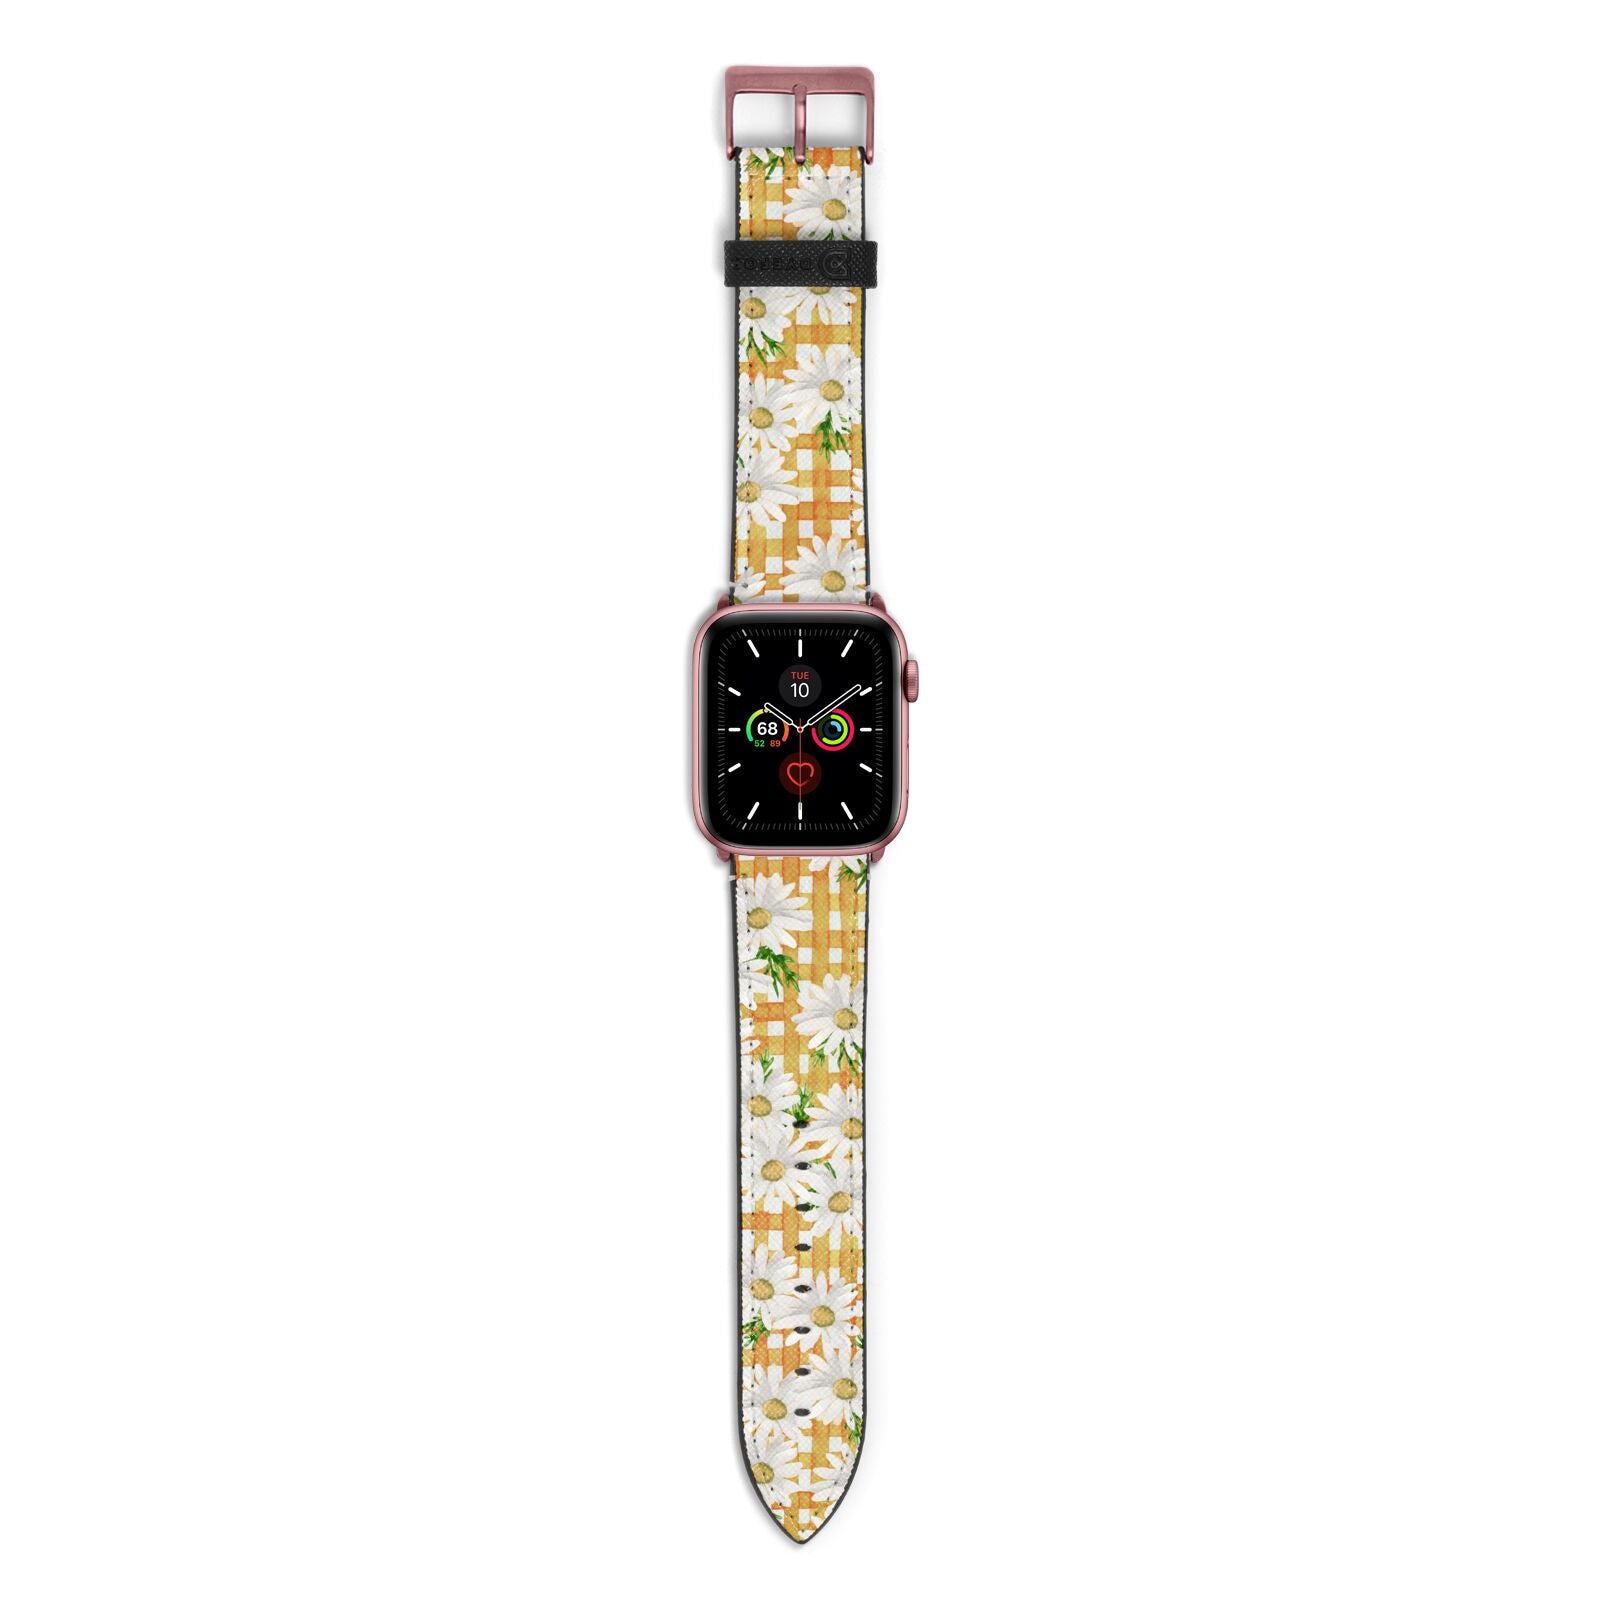 Checkered Daisy Apple Watch Strap with Rose Gold Hardware